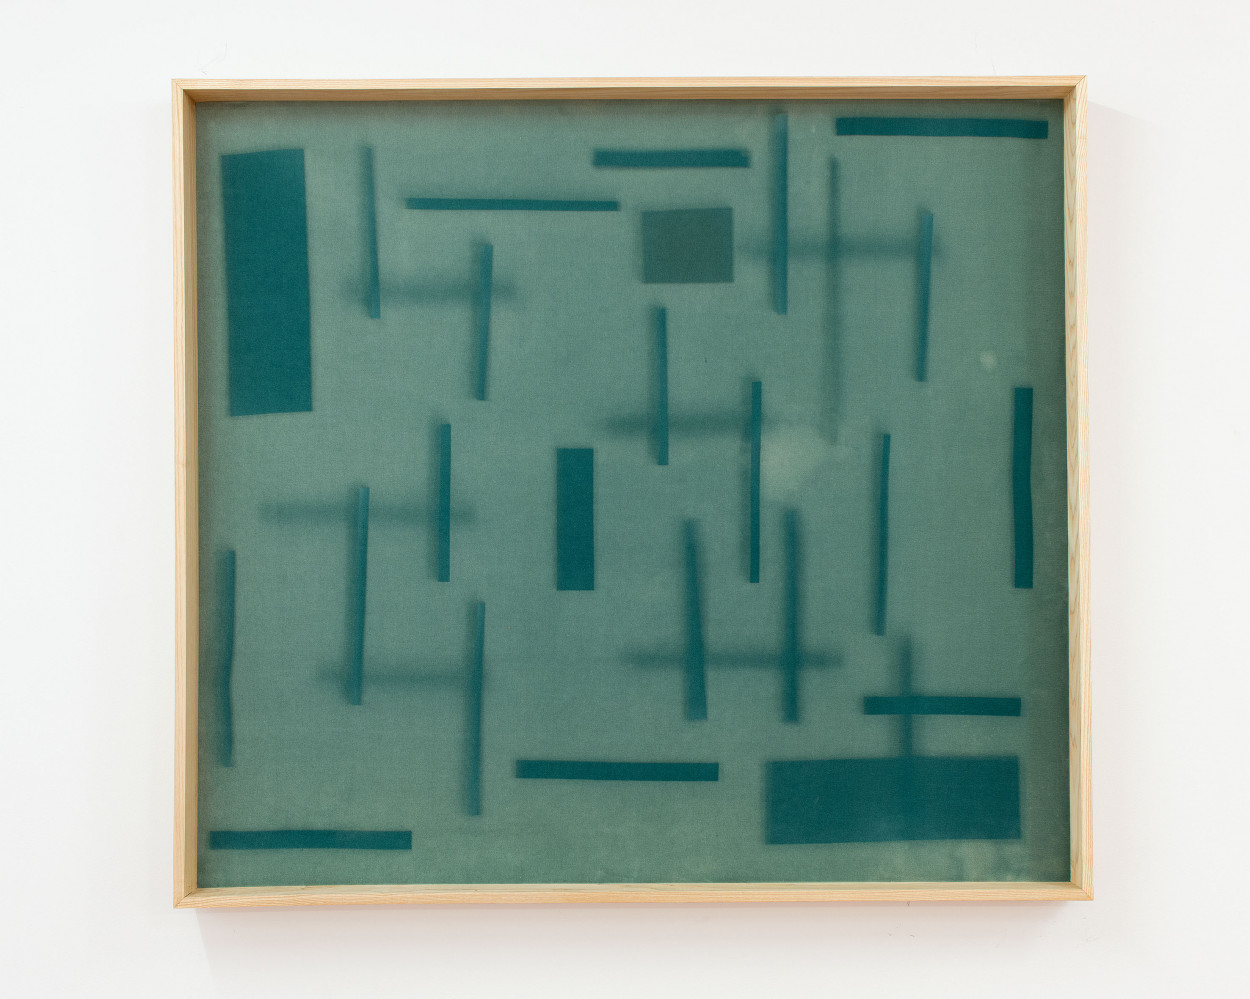 velvet on wooden board, wooden frame 85 x 95 x 7 cm; courtesy the artist and Pola Magnetyczne Gallery, Warsaw